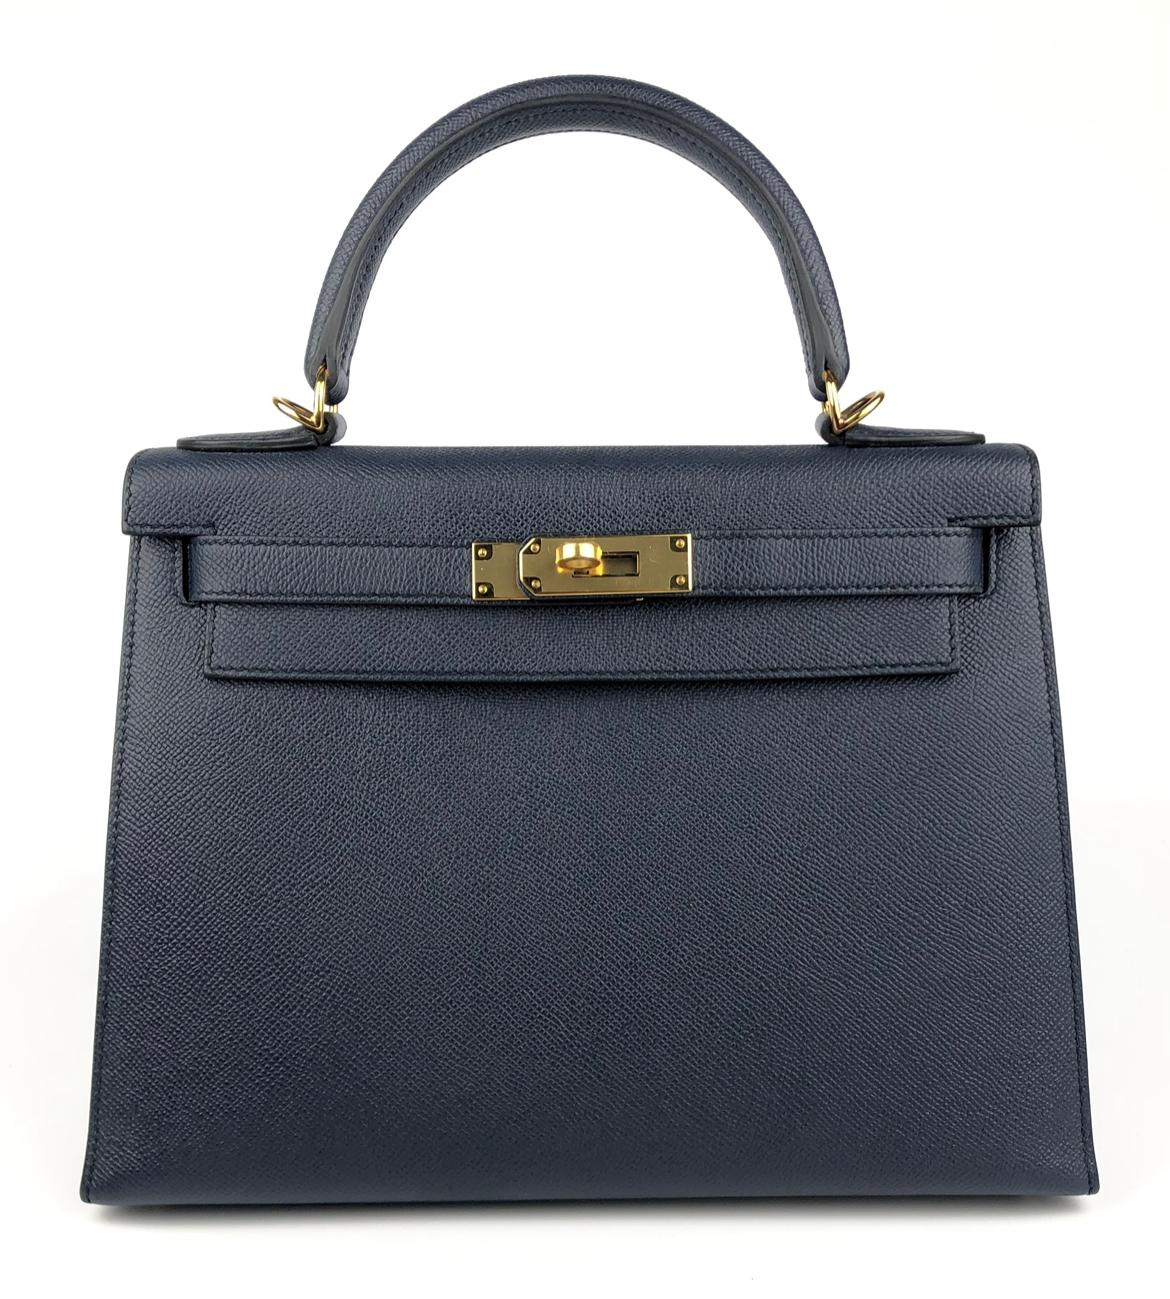 Absolutely Stunning Rare As New Hermes Kelly 28 Sellier Blue Indigo Epsom Leather complimented by Gold Hardware. As New with Plastic on all hardware and feet. 2021 Z Stamp. 

Shop with Confidence from Lux Addicts. Authenticity Guaranteed! 




